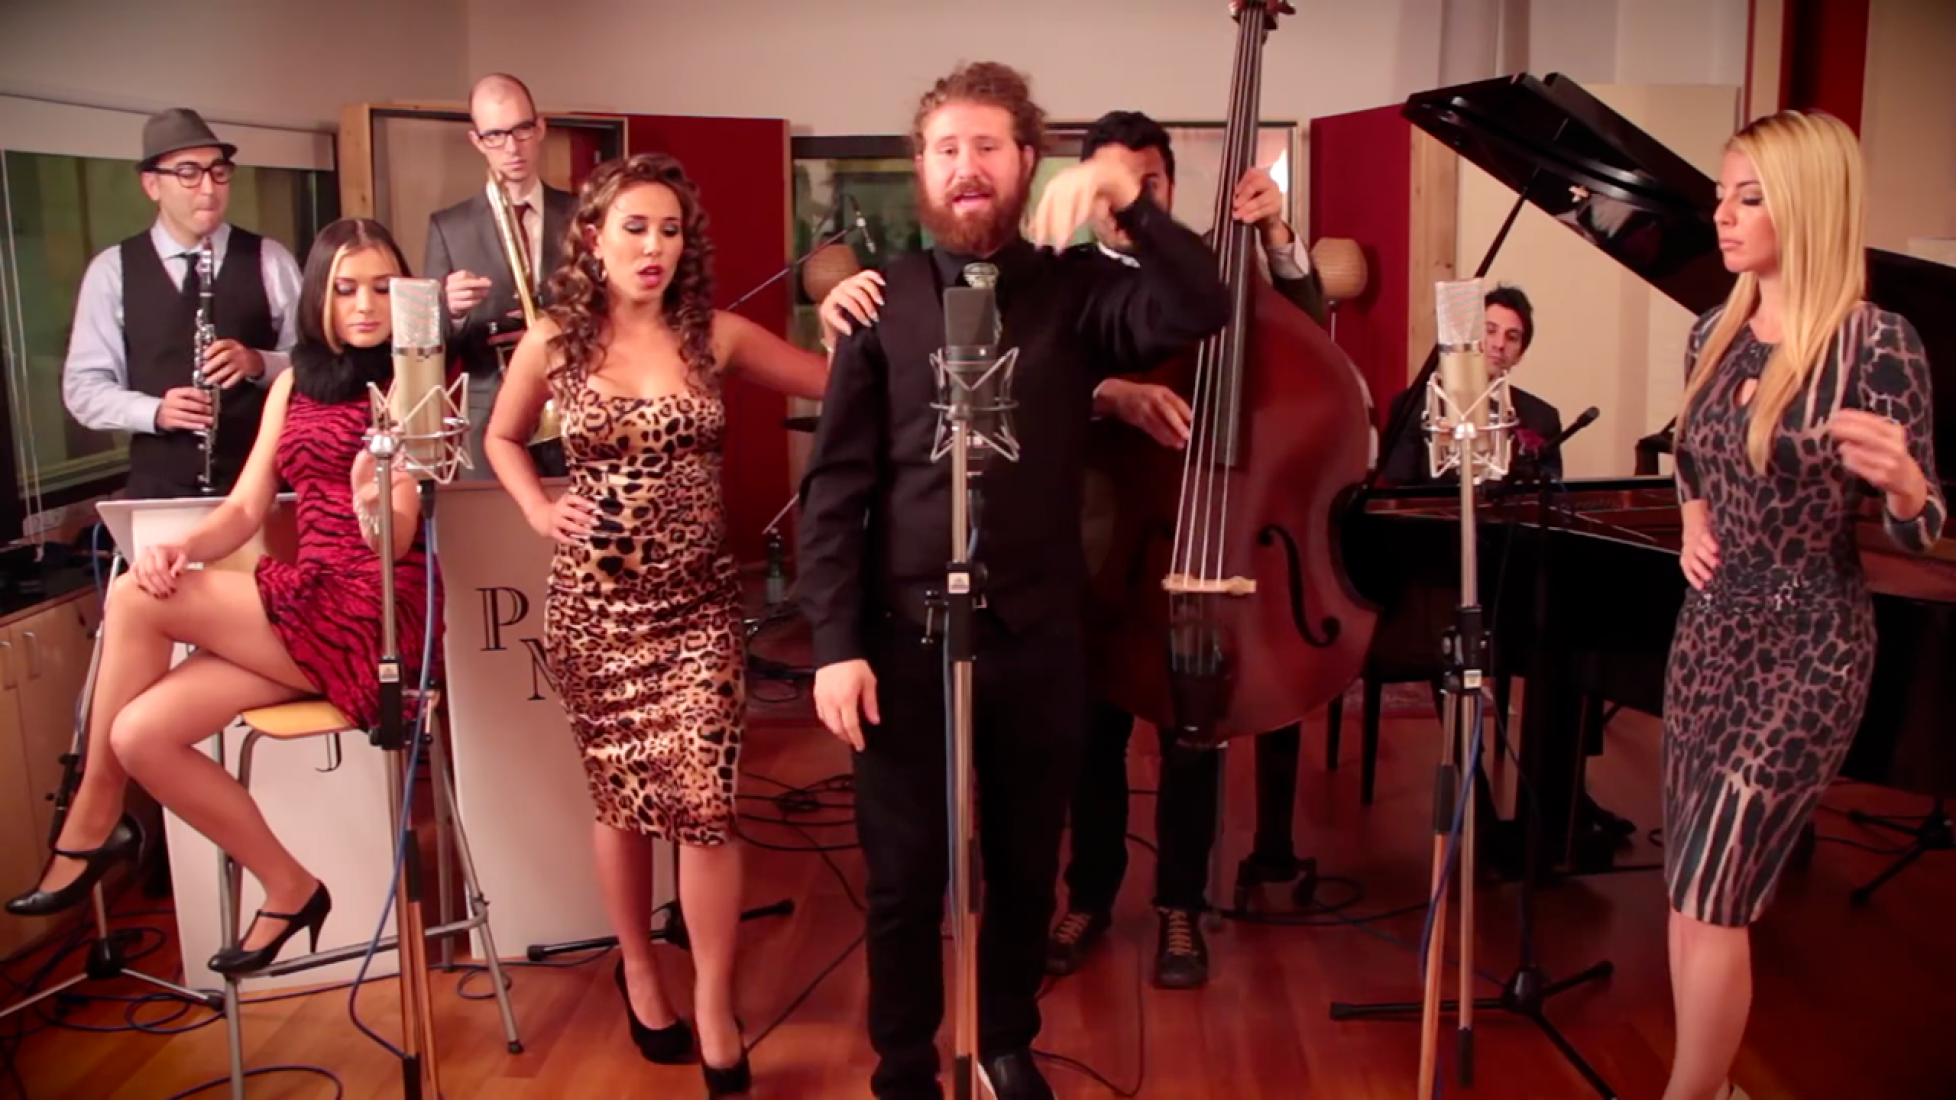 All About That Bass by Postmodern Jukebox. European Tour Version The